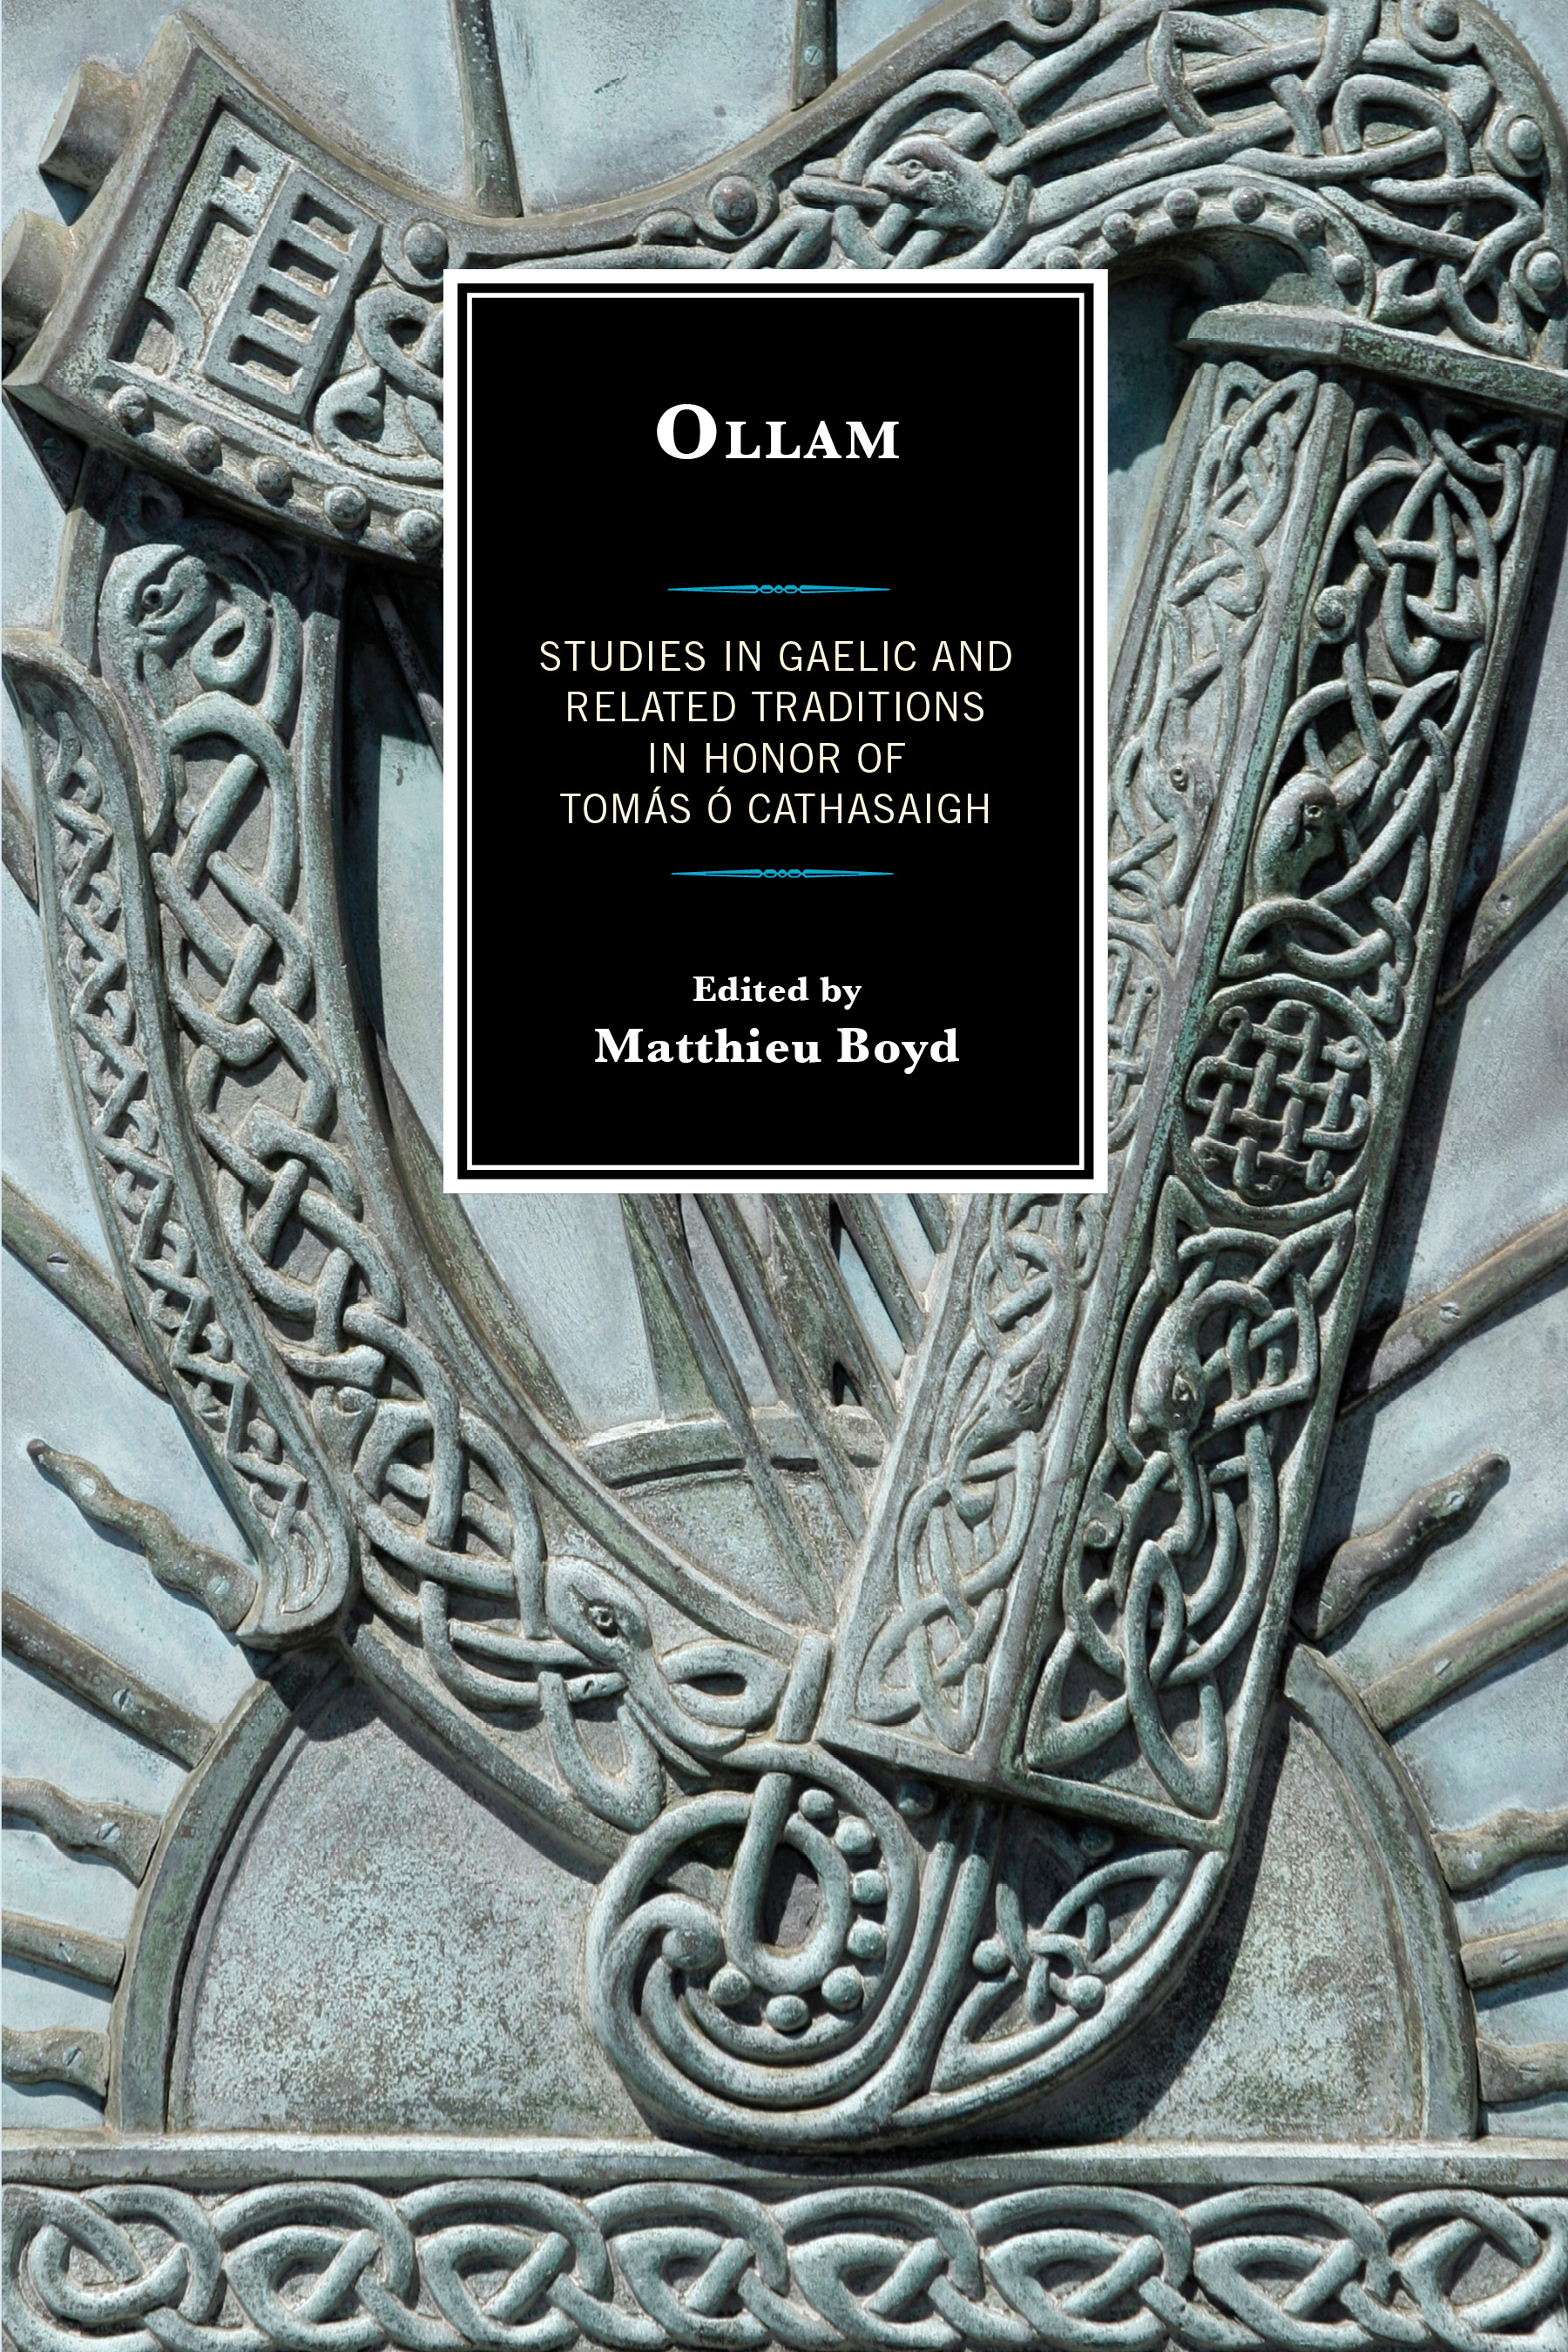 Ollam: Studies in Gaelic and Related Traditions in Honor of Tomás Ó Cathasaigh